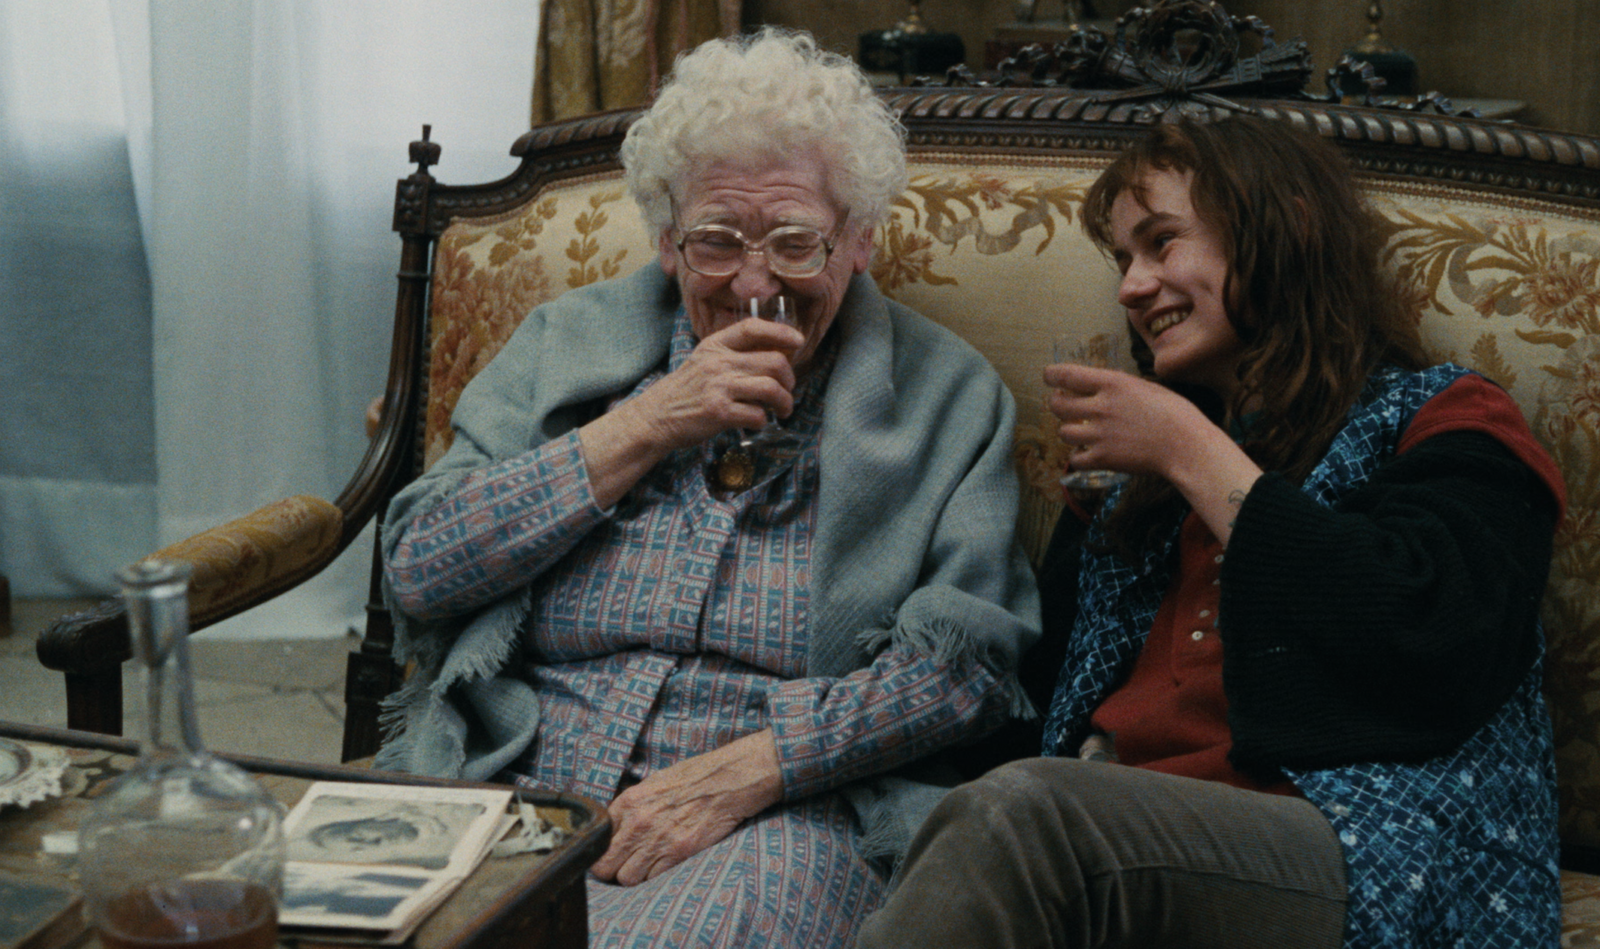 In a still from Agnès Varda’s 1985 film, Vagabond, a young woman (right) drinks cognac with an old woman (left) in a sitting room with an antique settee. They look like they’re having a great time. There are sheer curtains at the window and an album of old photos on the coffee table, next to a clear glass decanter. The old woman wears a day dress with a matching shawl. The young woman is wearing a mishmash of what looks like found clothing: dark jeans, a duotone red-and-black top with bell-shaped sleeves, and a blue patterned vest.